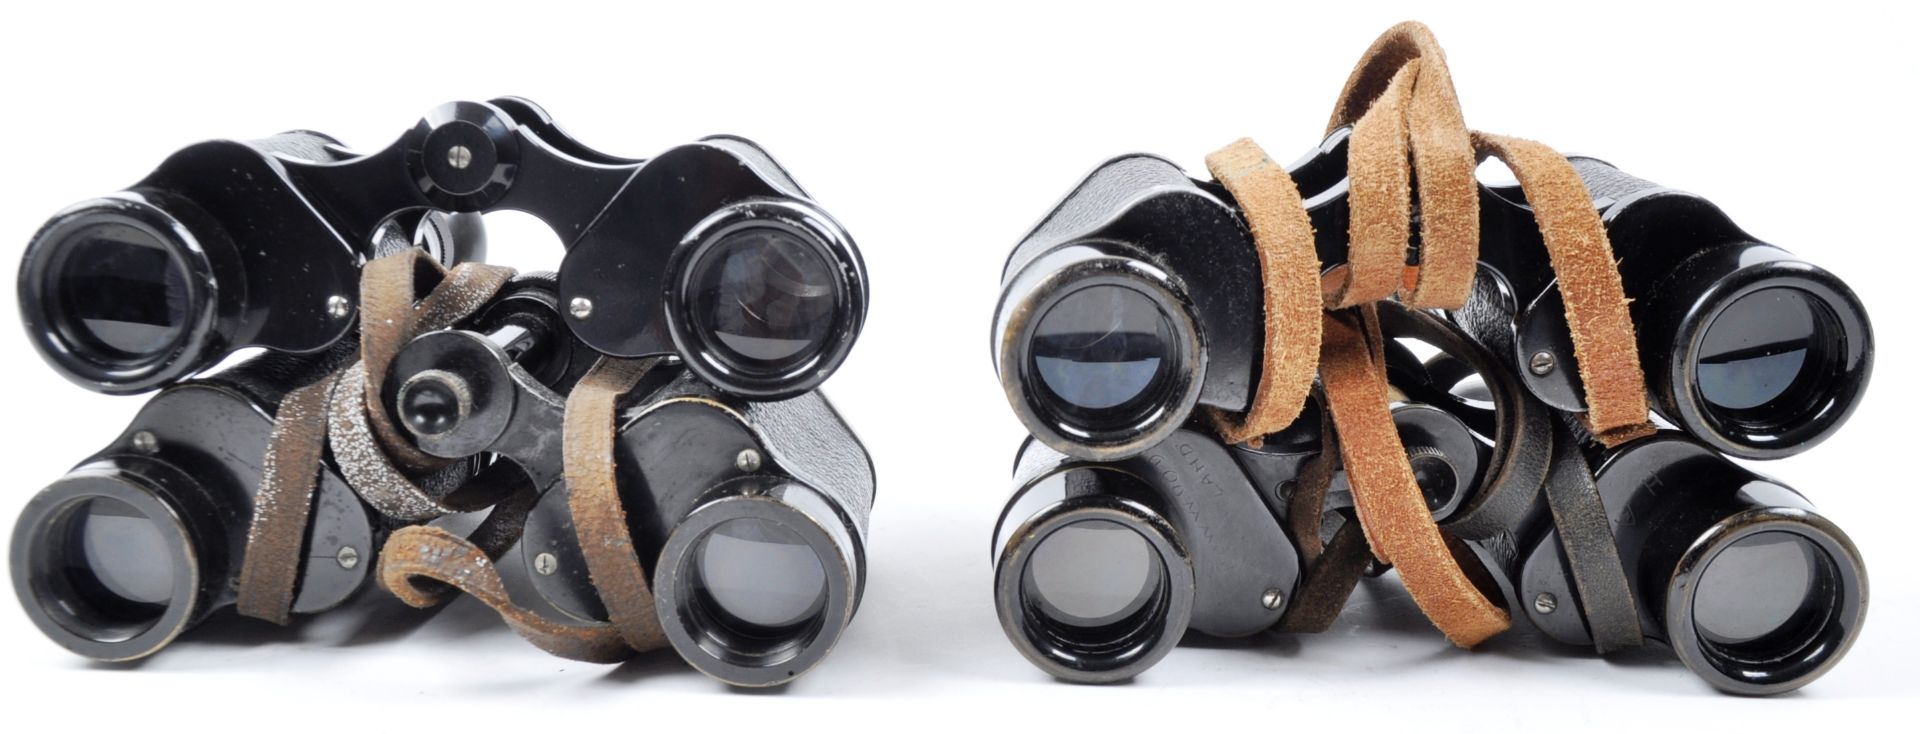 COLLECTION OF ROSS VINTAGE WARTIME BINOCULARS - Image 3 of 3